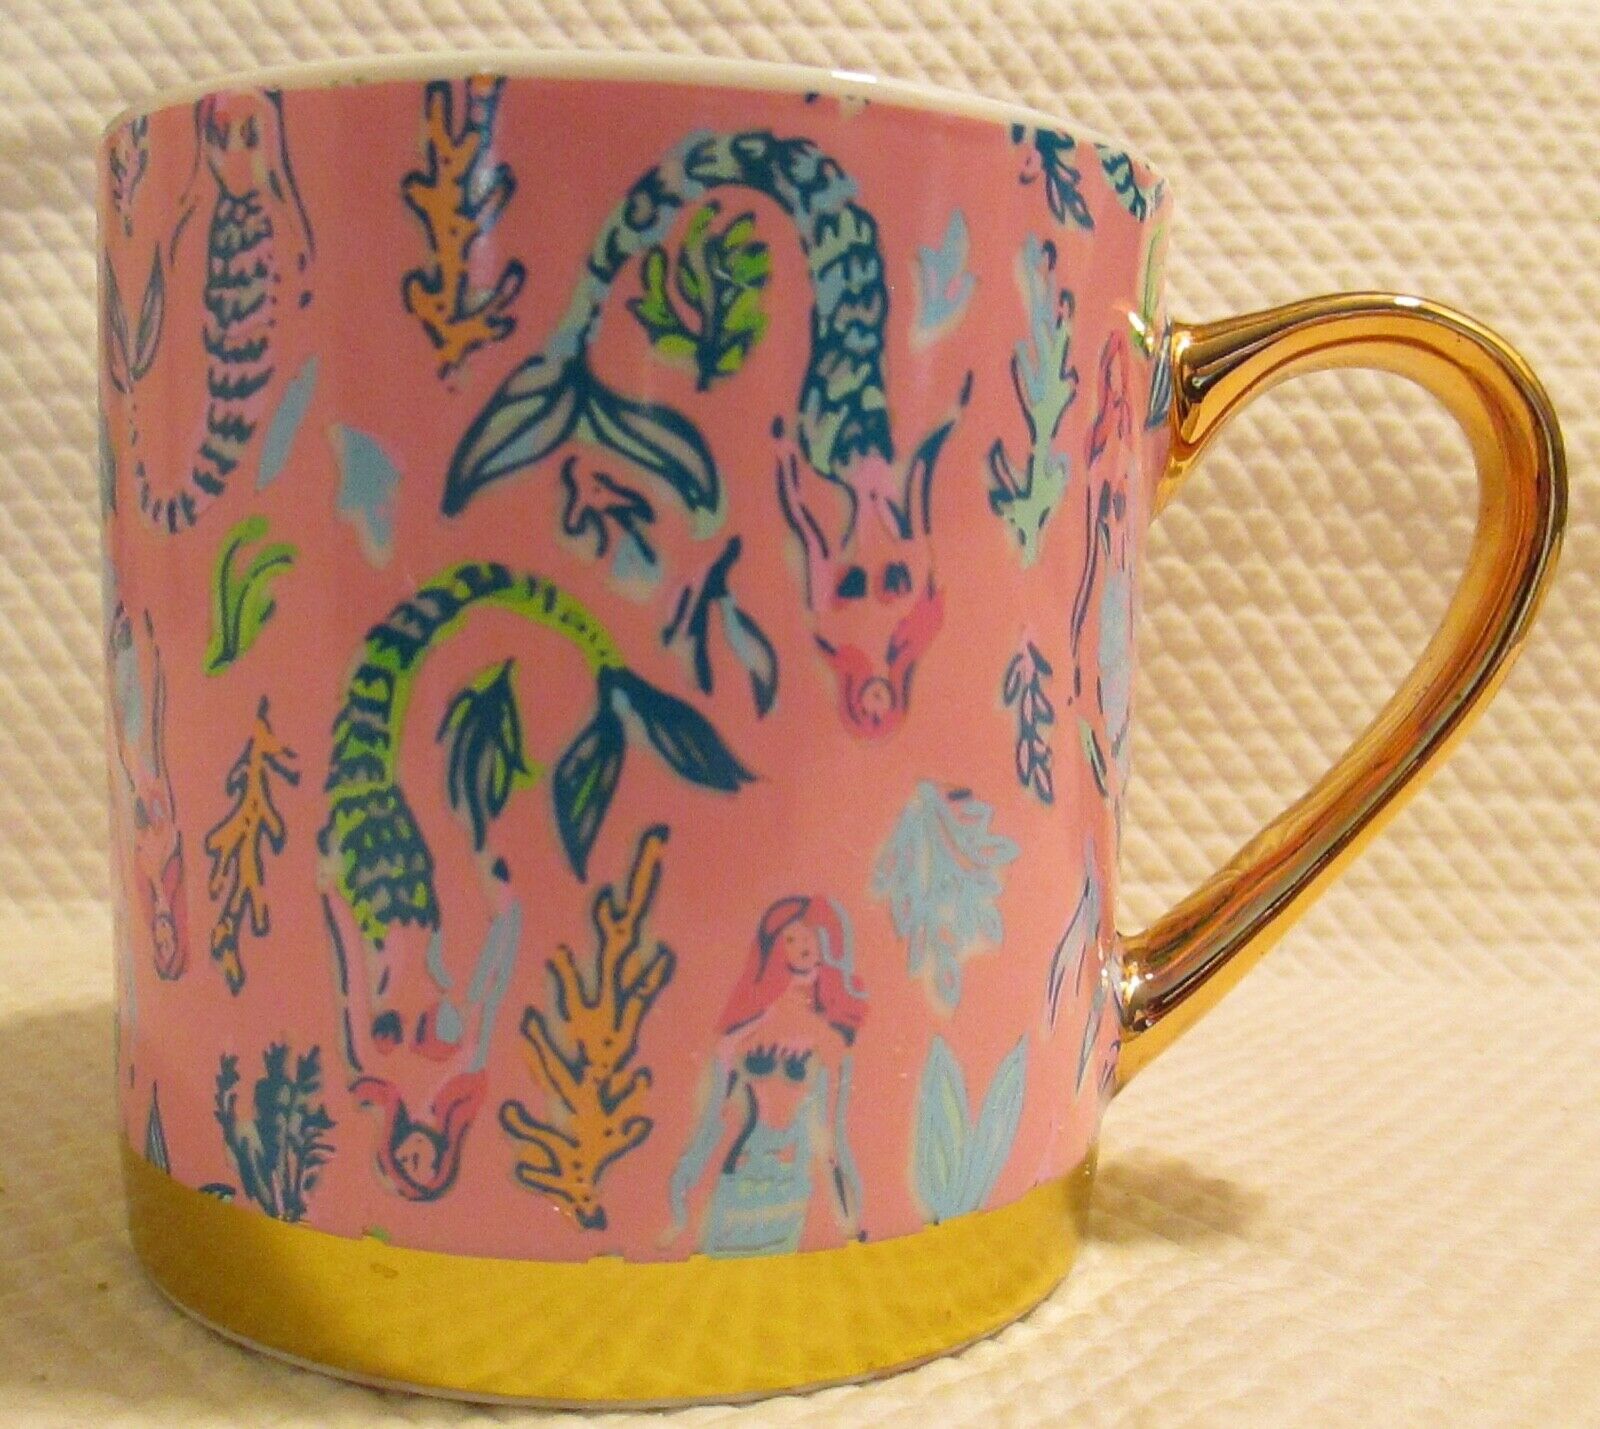 Lily Pulitzer 'girls Night Out' Pink Mermaid Cup Mug - Brand New W/out Box!